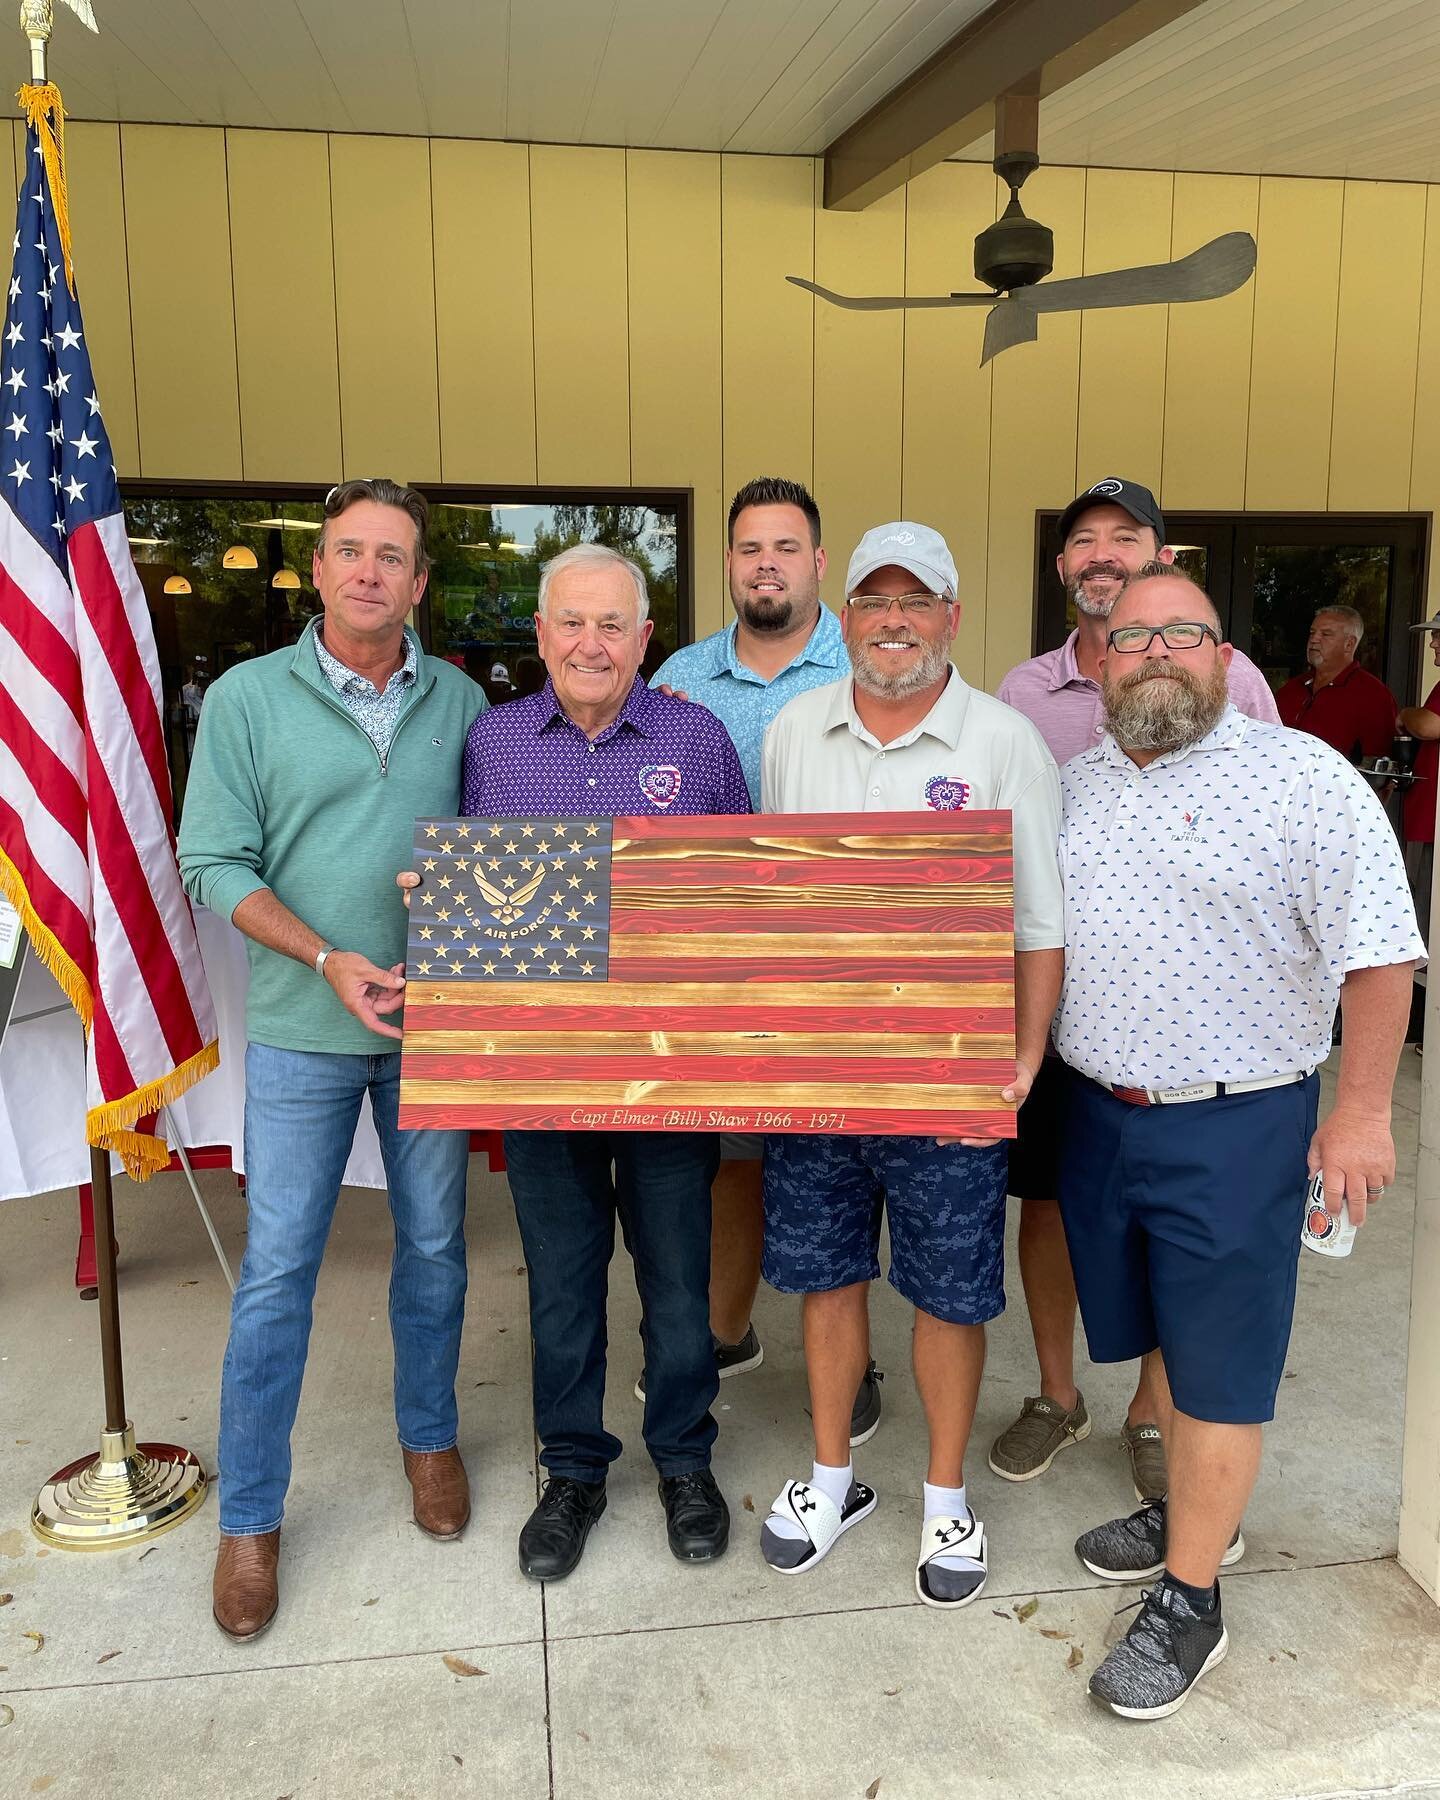 Such an Honor to surprise this Vietnam Vet, Capt Shaw, with his very own flag. He was a B-52 pilot and dropped over 20,000 bombs and did over 200 missions!! True Honor to meet him let alone hand him a flag!